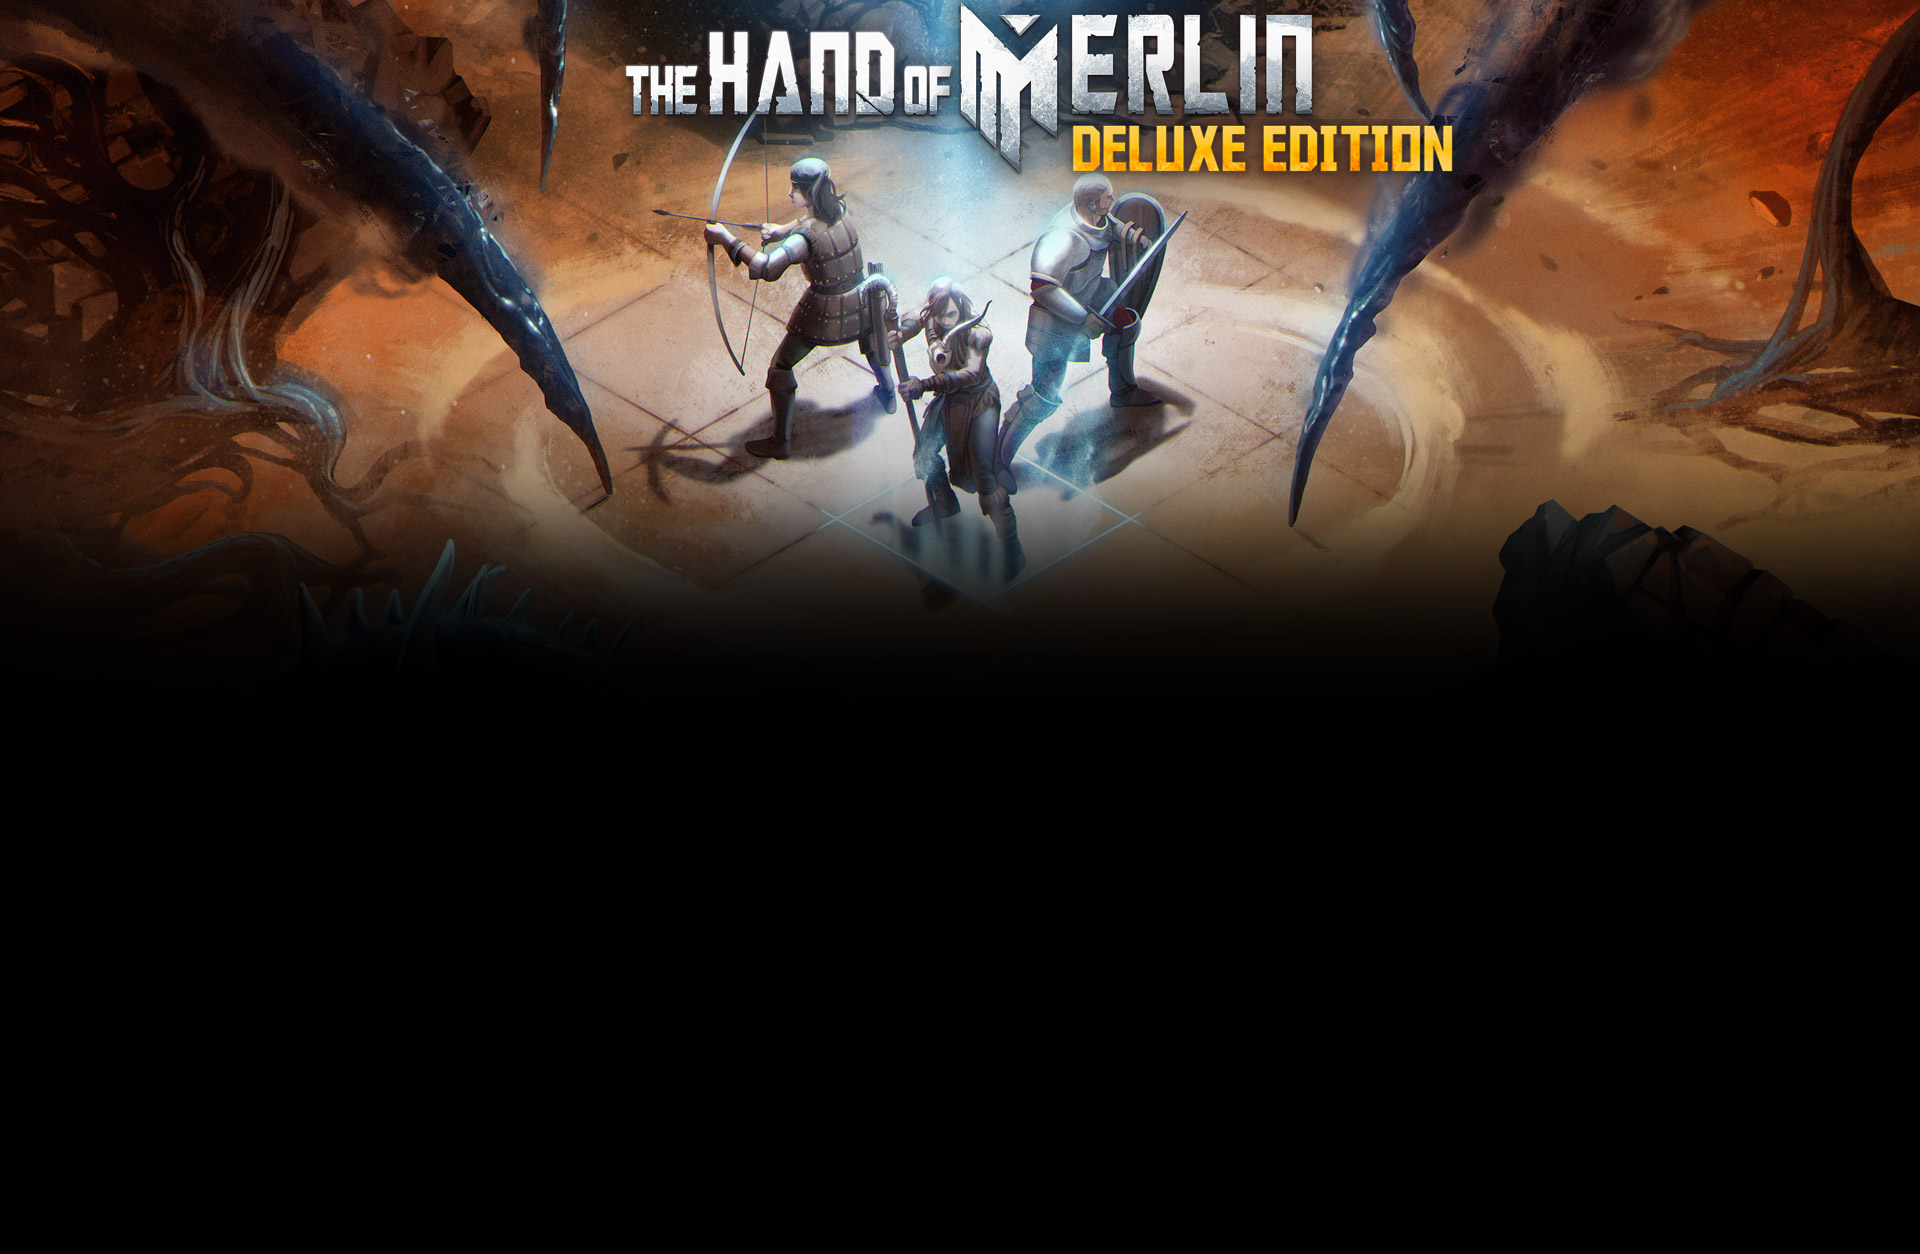 download the new version for iphoneThe Hand of Merlin